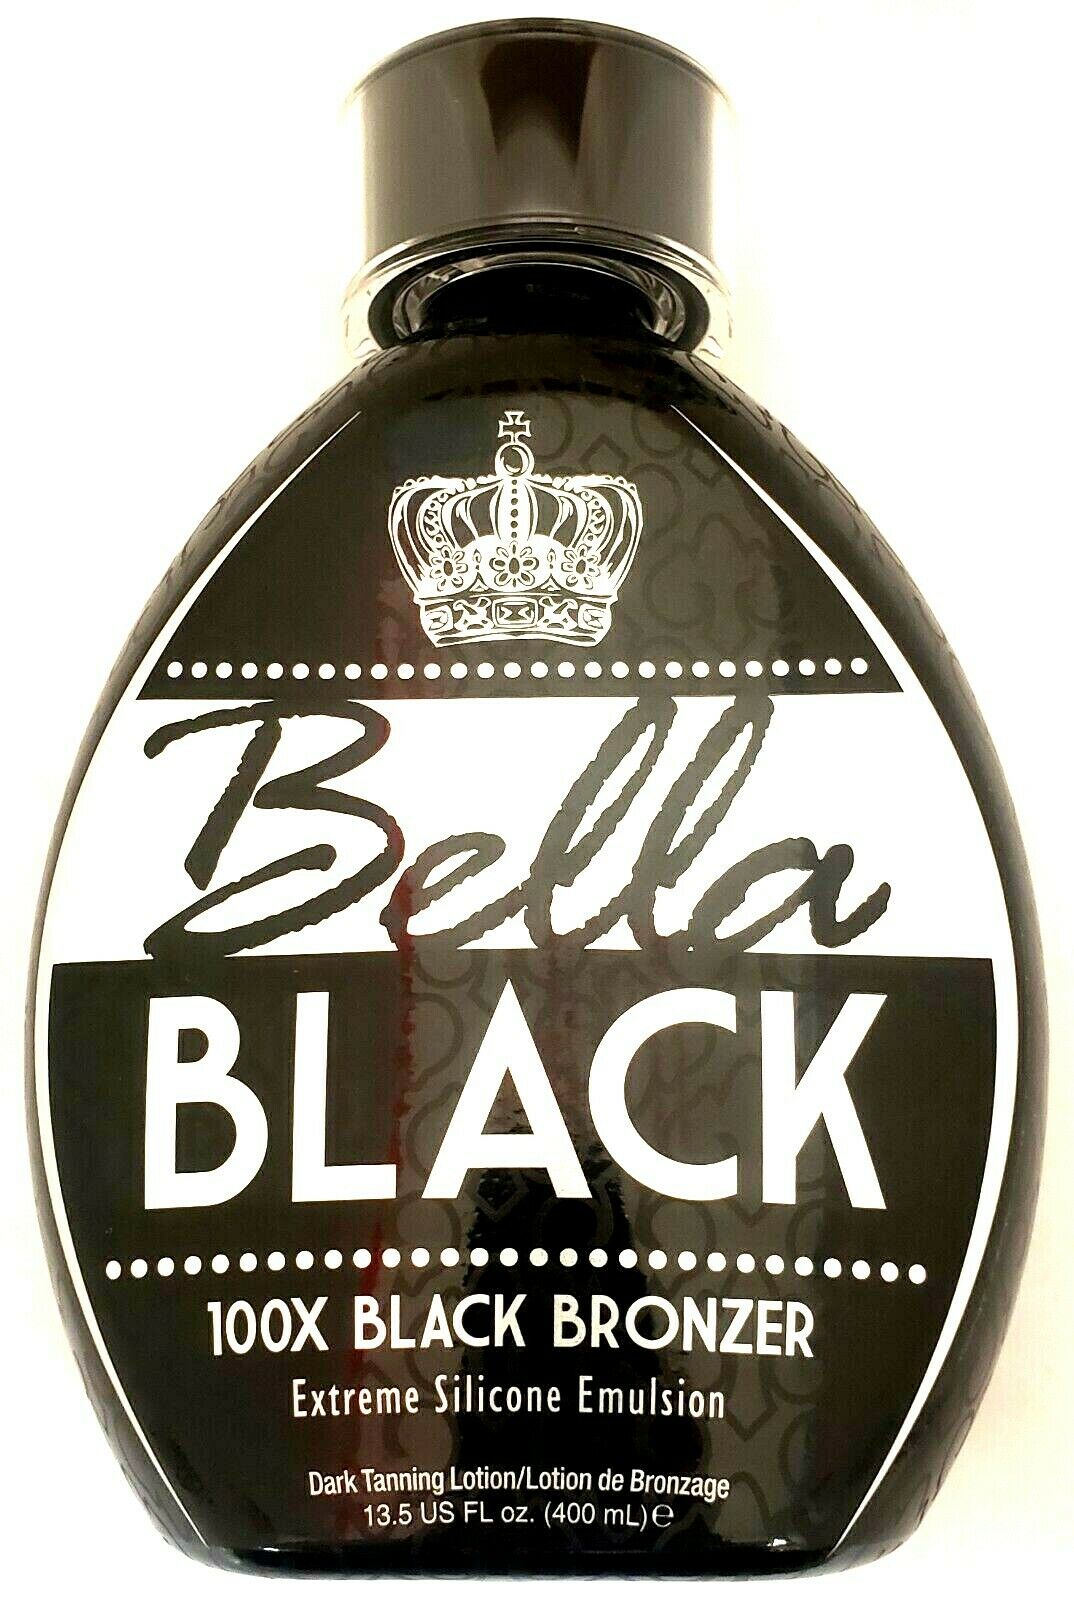 Bella Black 100X Black Bronzer Extreme Silicone Tanning Lotion By Dolce Vita Tan - image 1 of 2